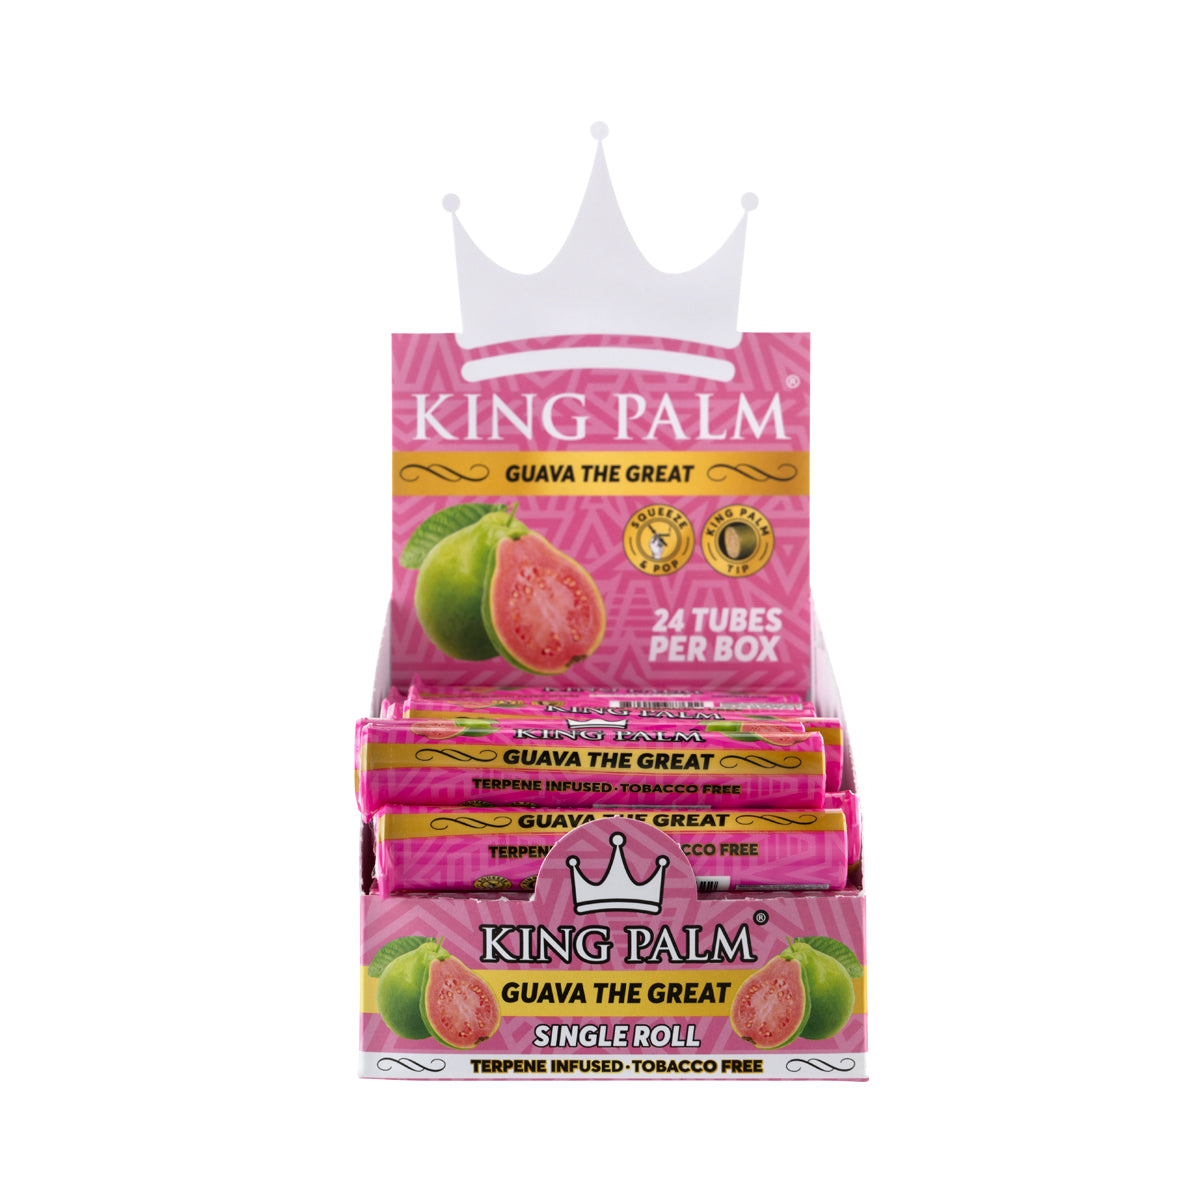 King Palm™ | Single Tube Pre-Roll Mini Blunt Wraps | Guava the Great - 24 Count